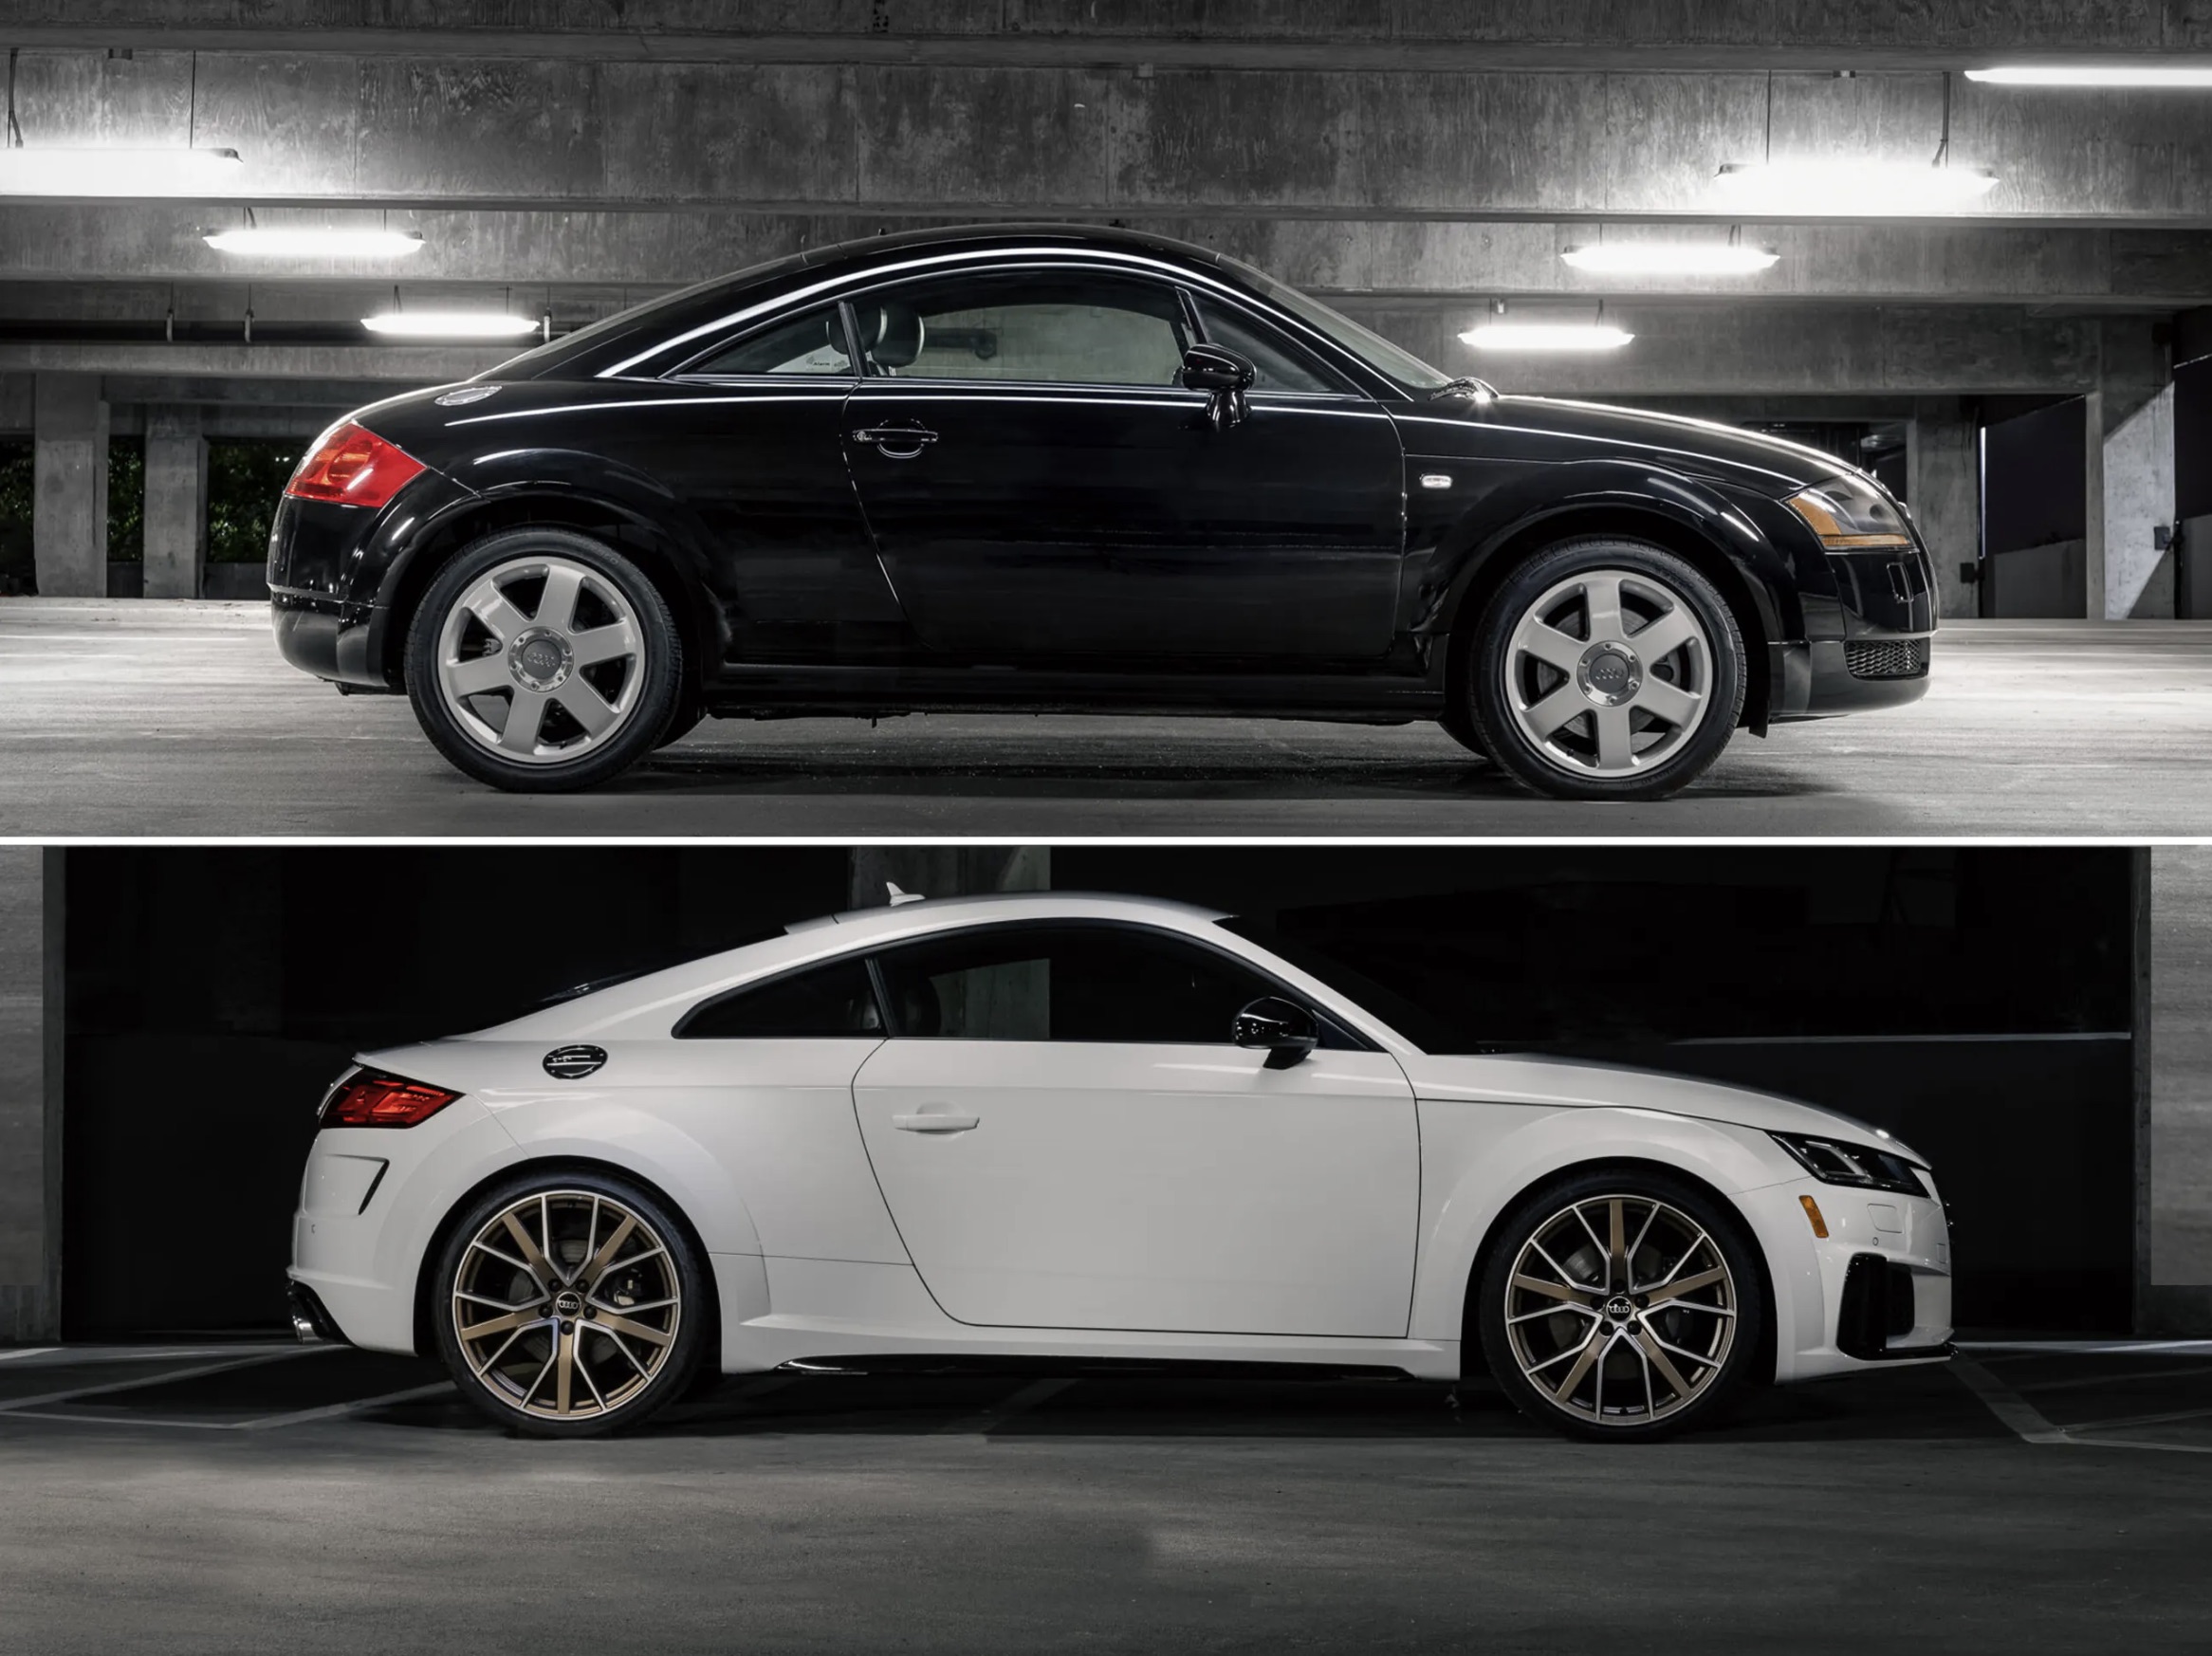 How the Audi TT went from doodle to design icon